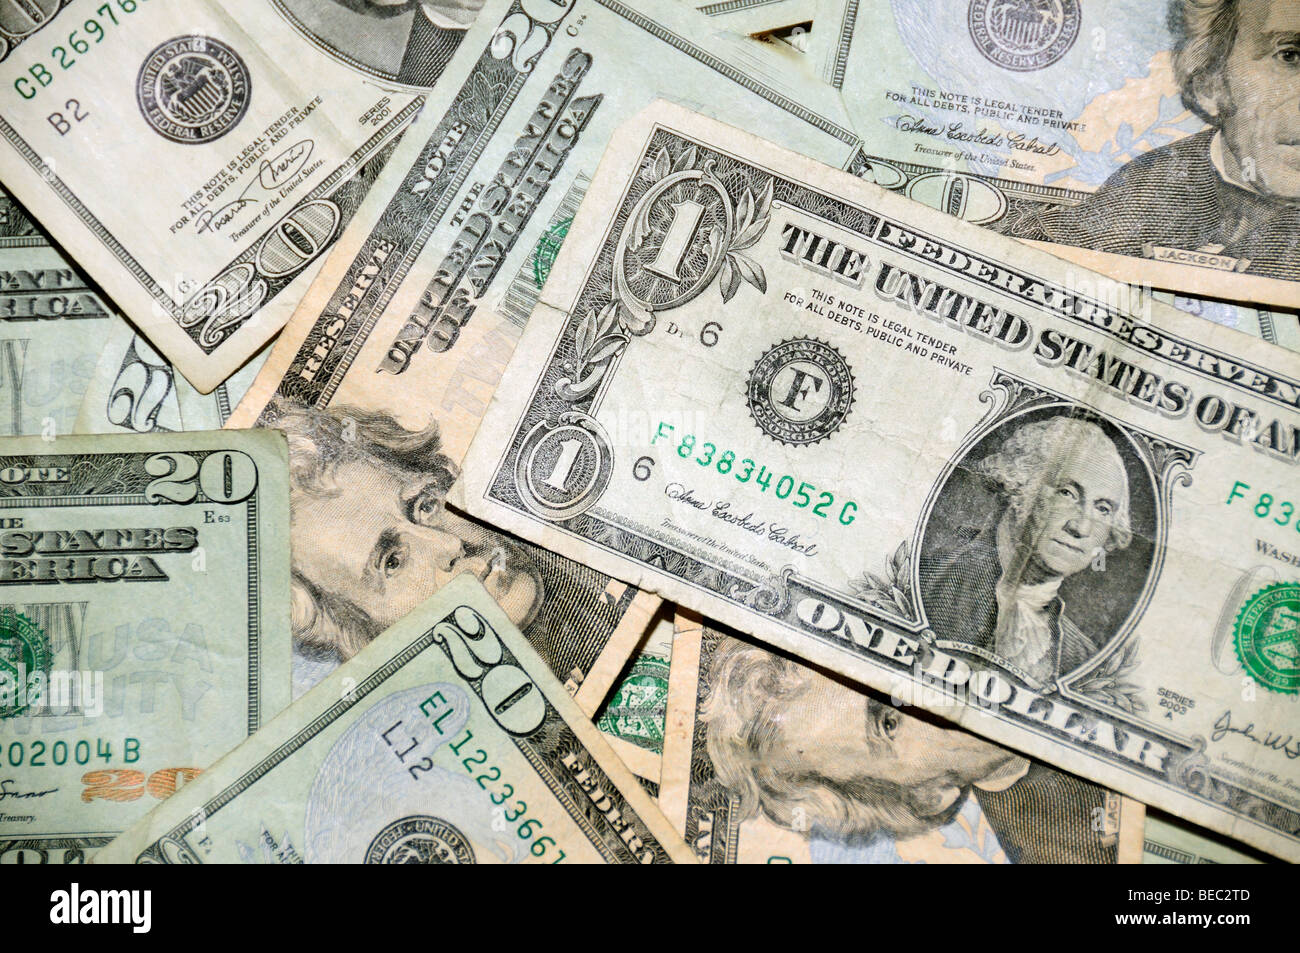 A stack of money in U. S. dollars. Stock Photo